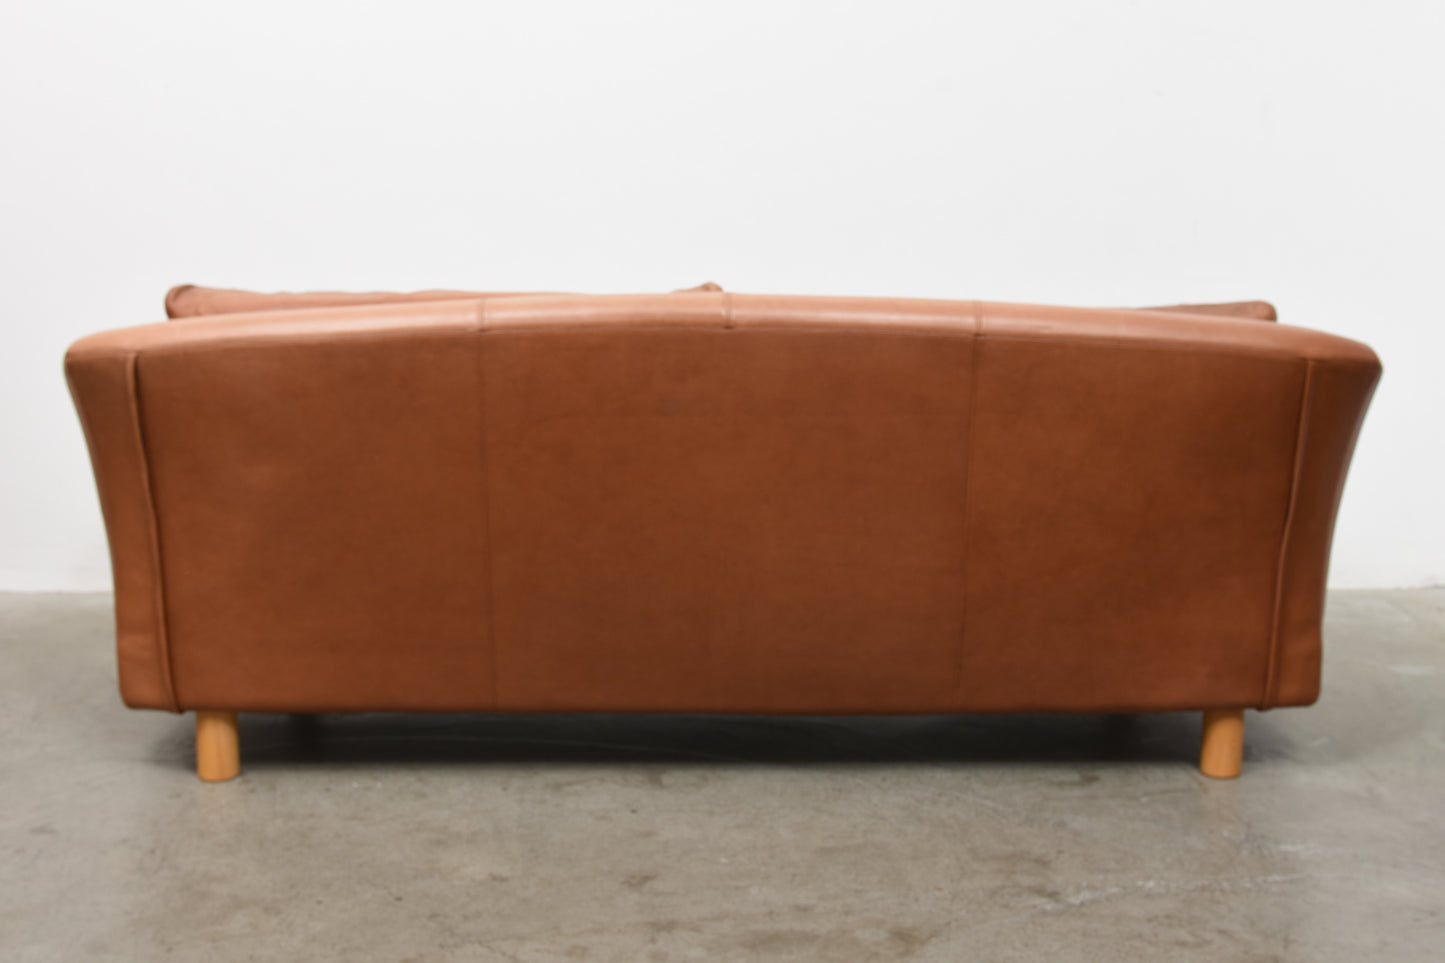 1980s leather sofa by Dux